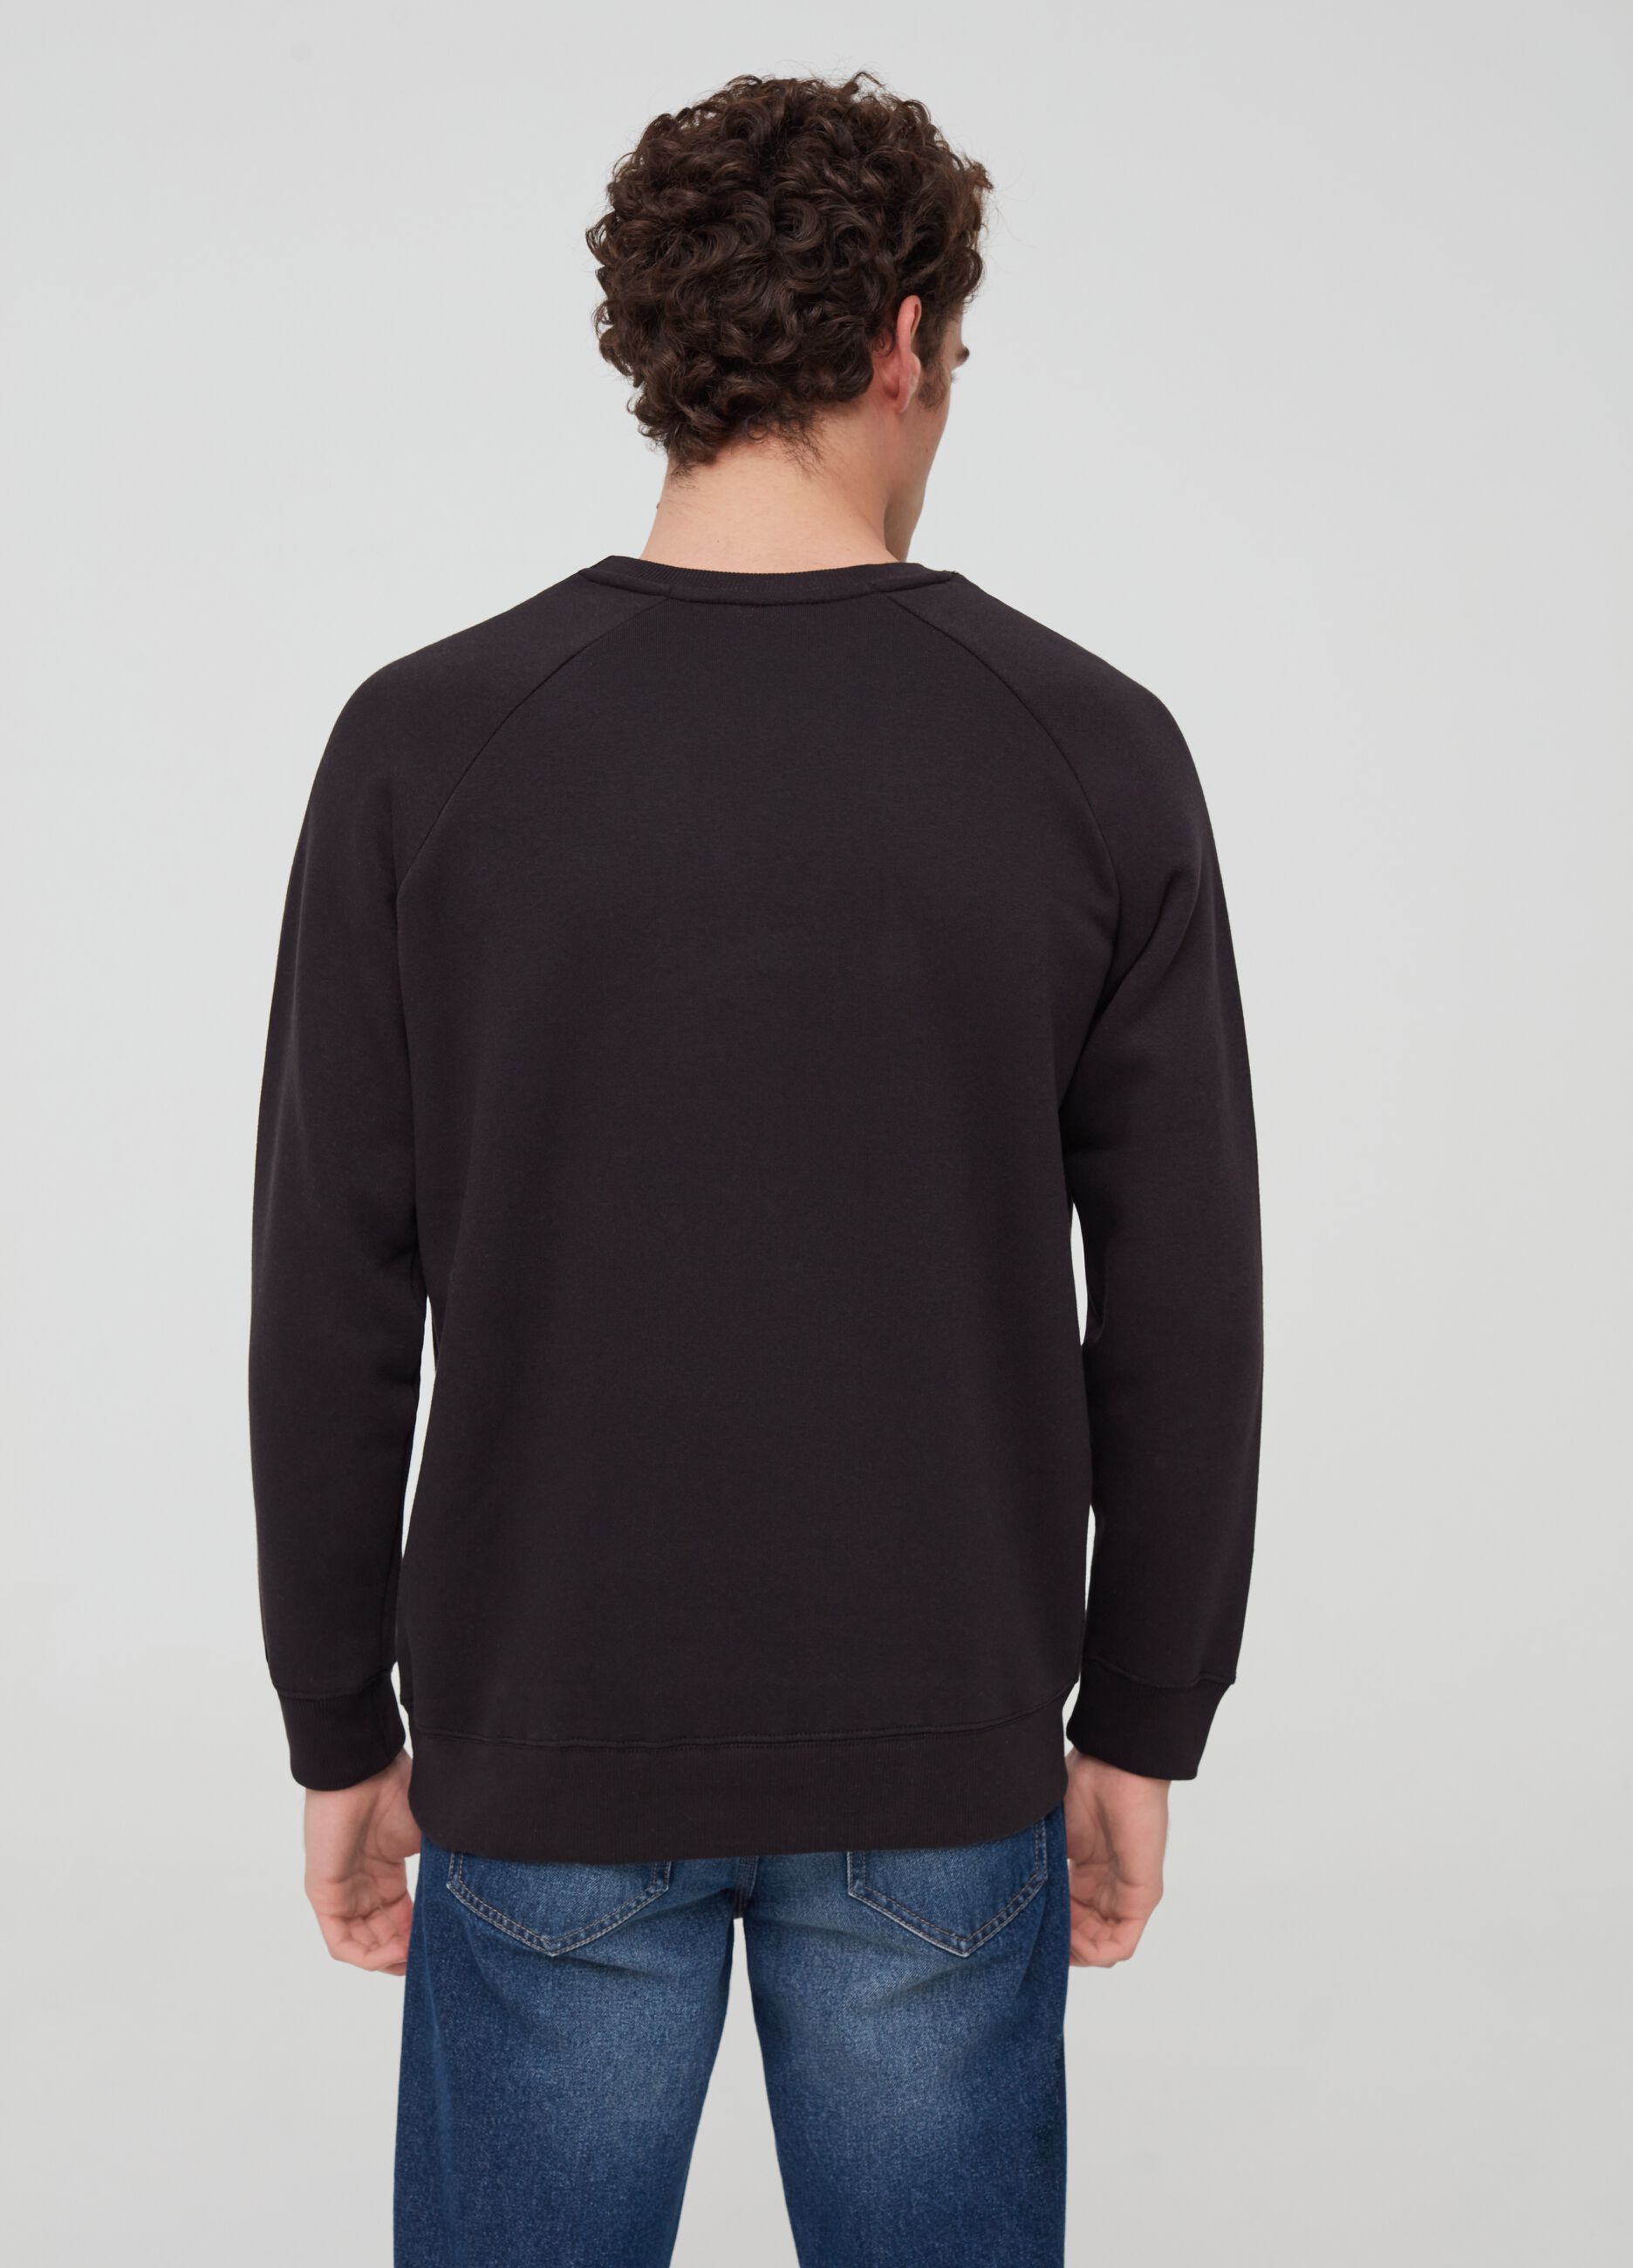 Sweatshirt with raglan sleeves, round neck and lettering print